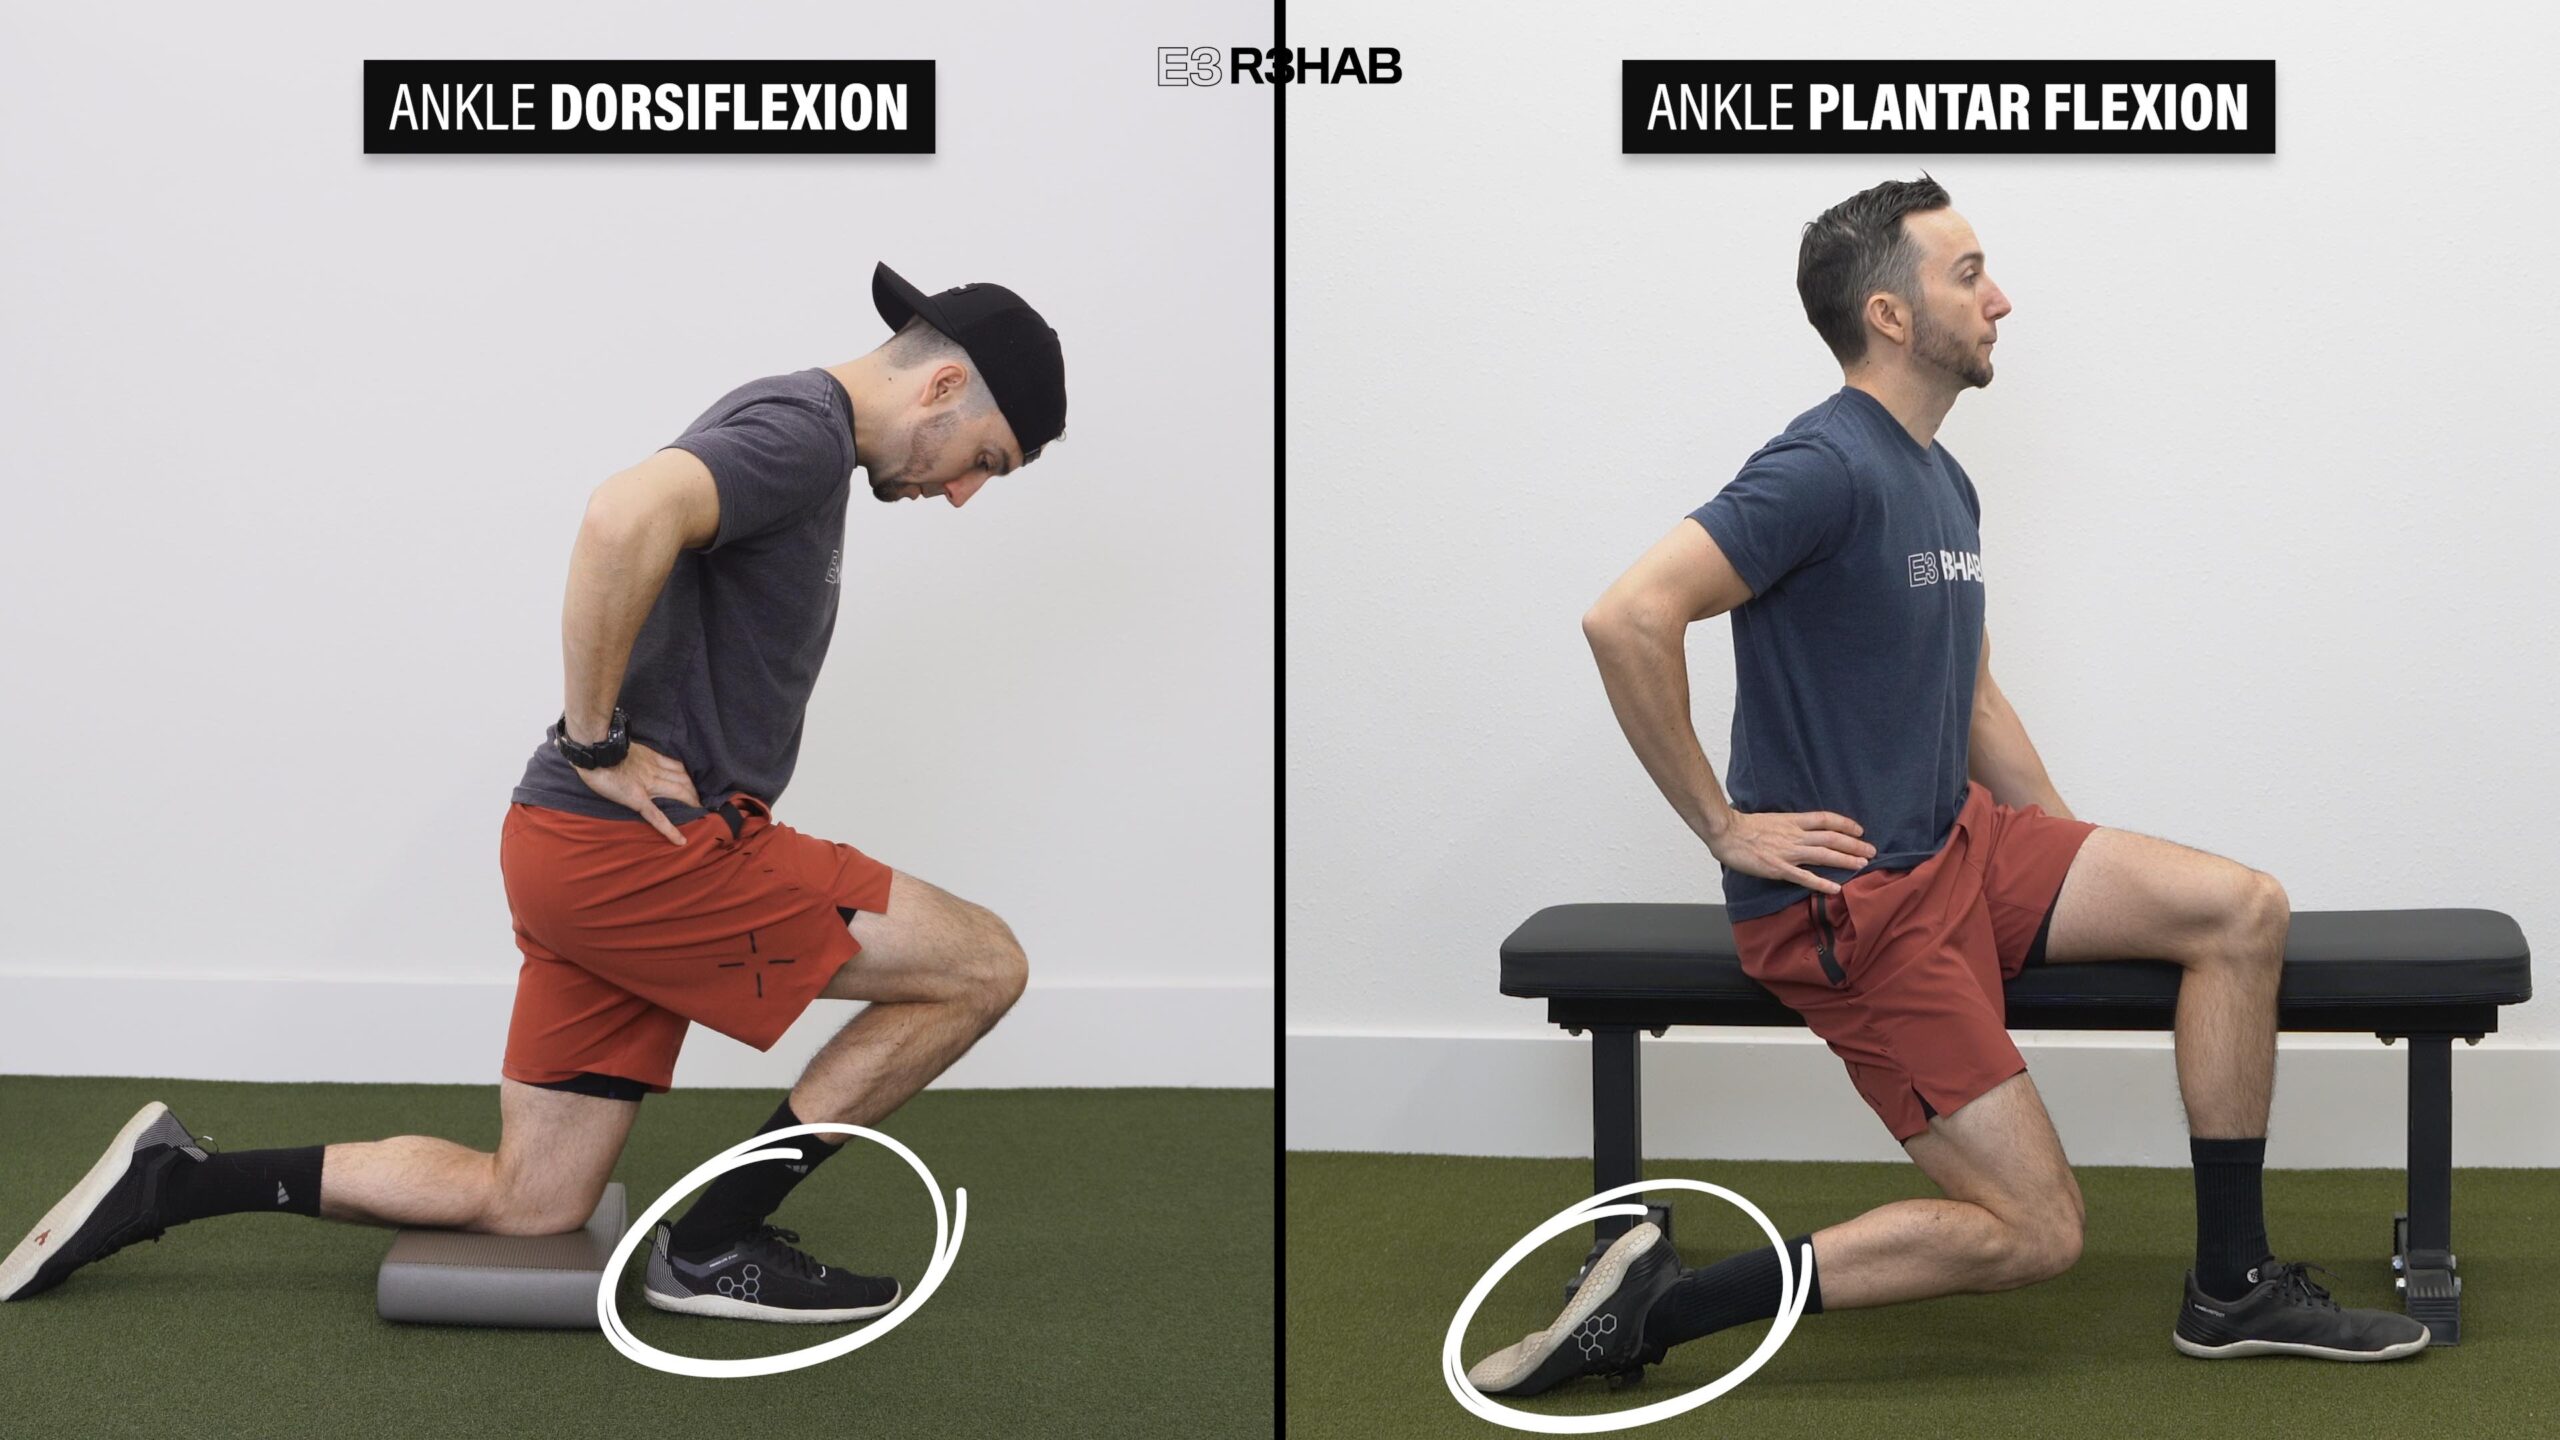 Foot and Ankle Strength - E3 Rehab